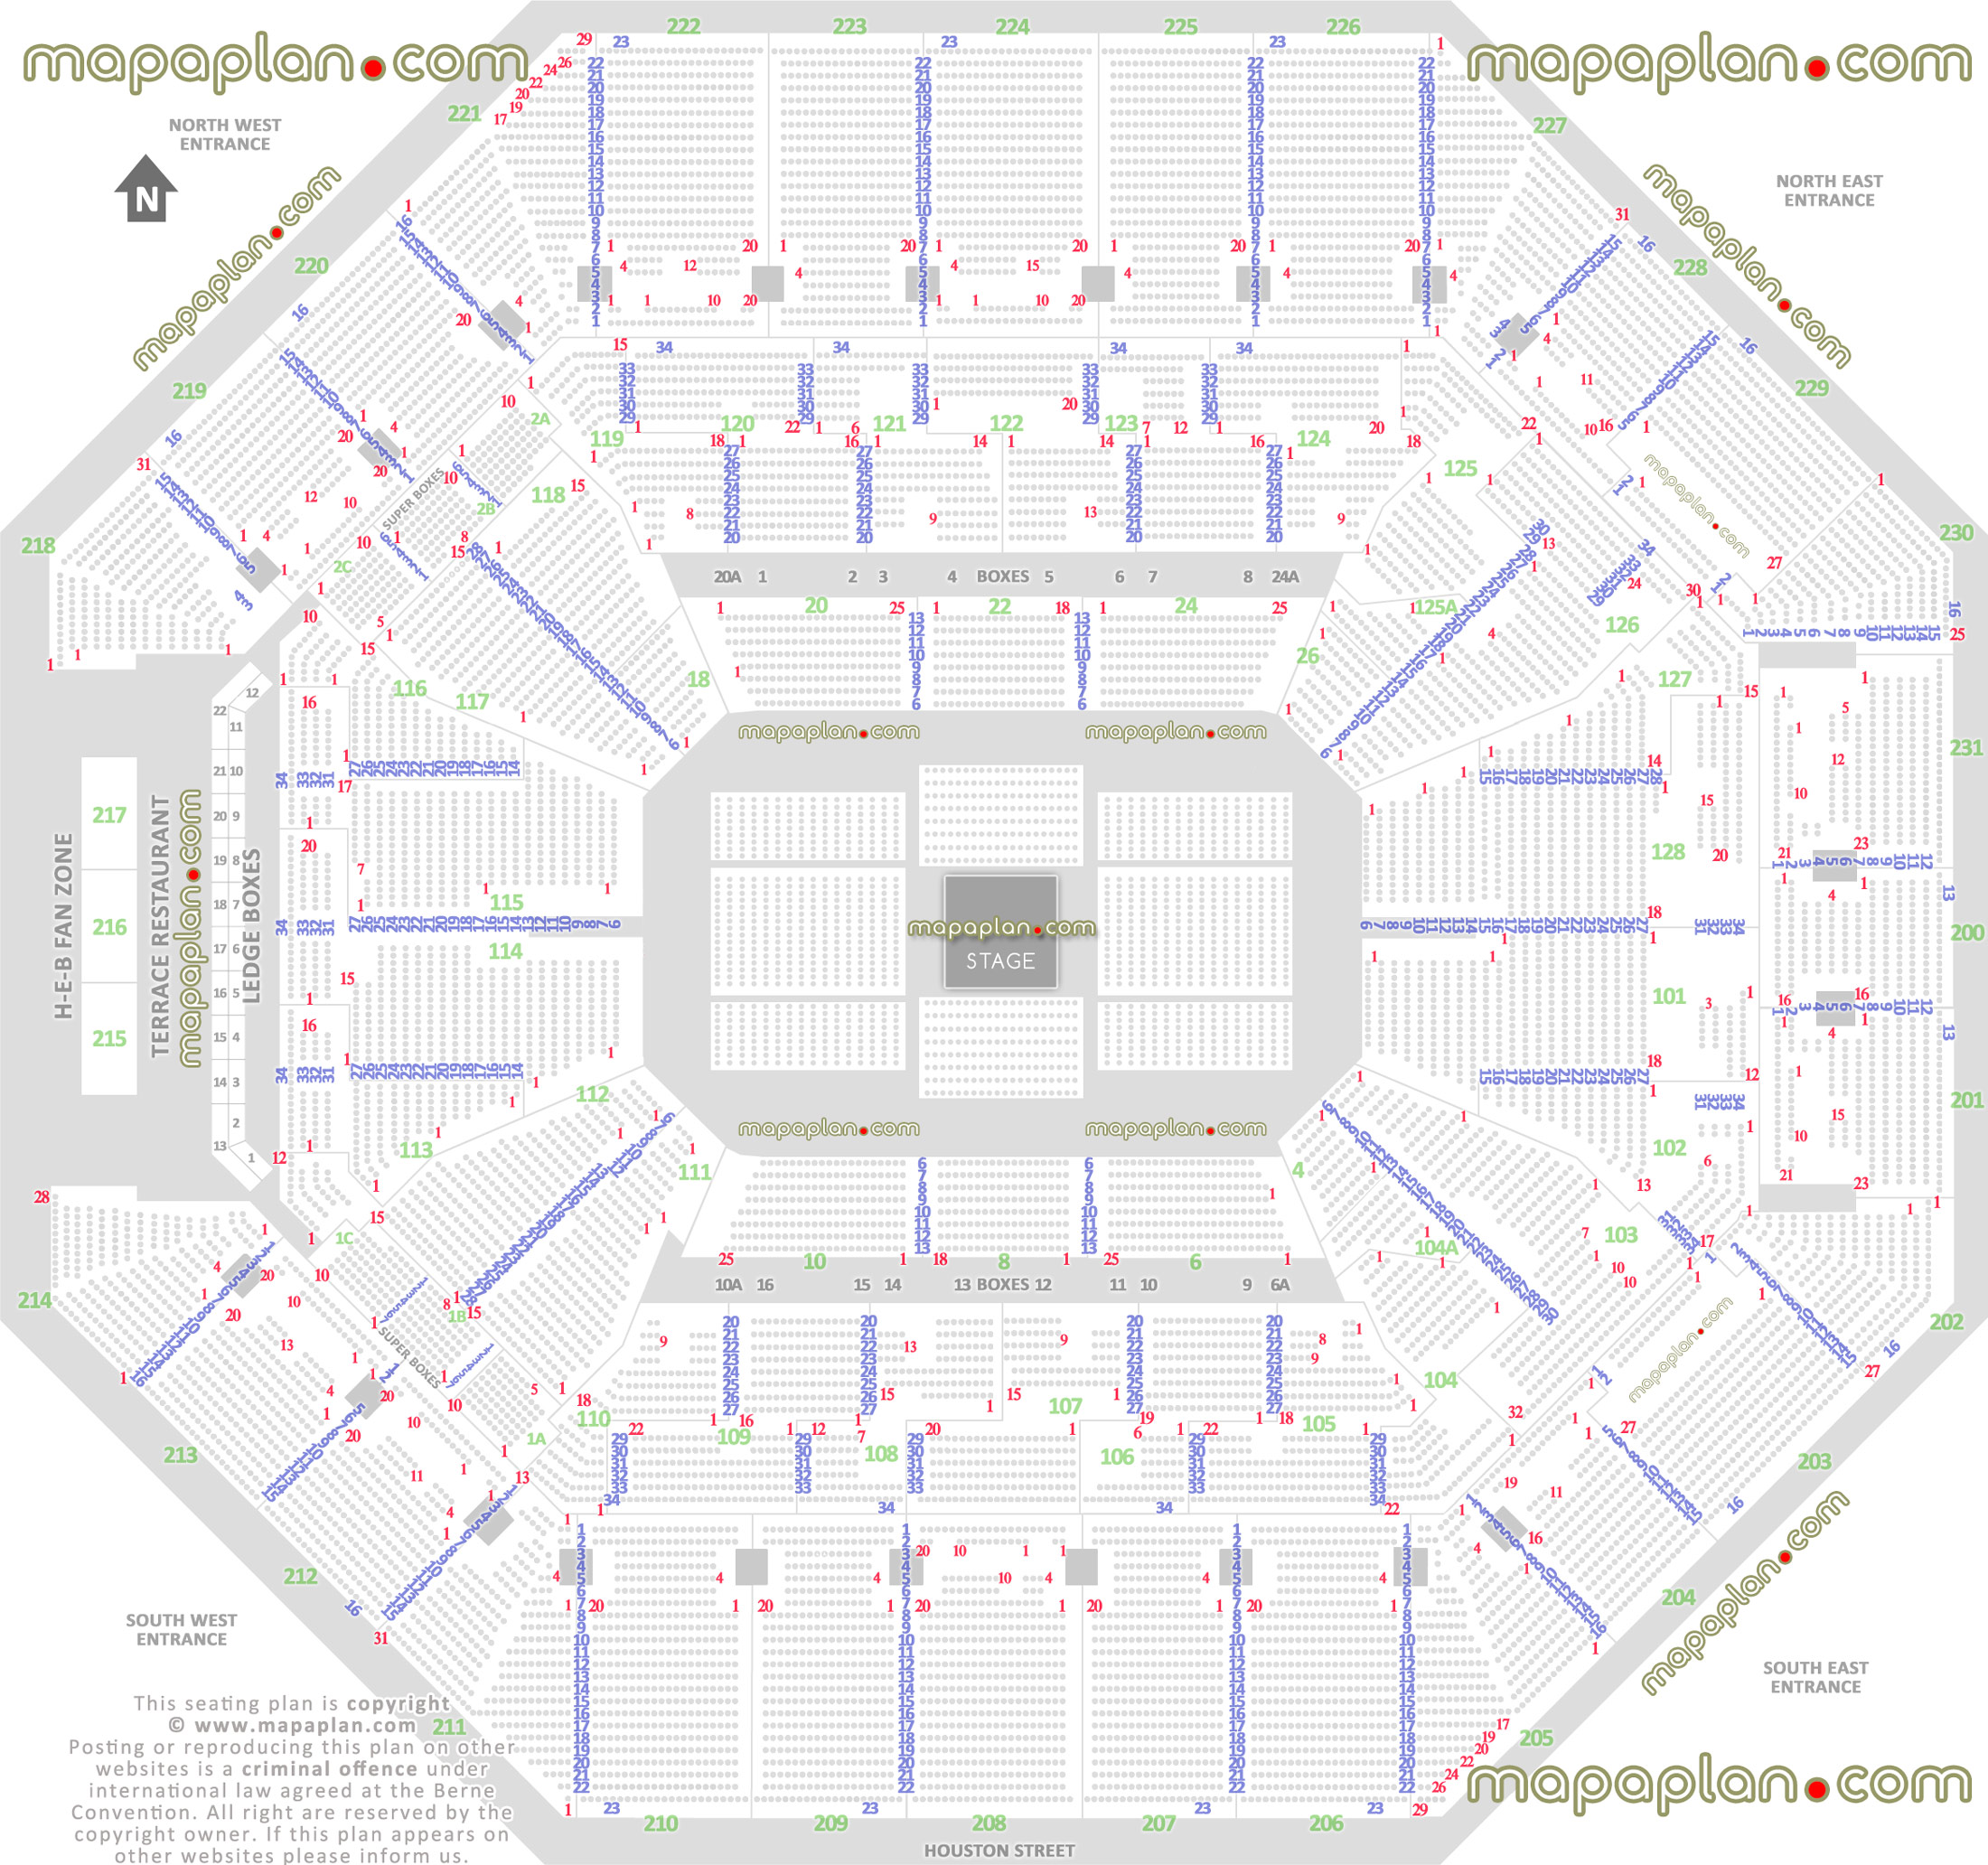 concert stage round 360 degree arrangement how many seats row balcony sections 201 202 203 204 205 206 207 208 209 210 211 212 213 214 215 216 217 218 219 220 221 222 223 224 225 226 227 228 229 230 San Antonio ATT Center seating chart